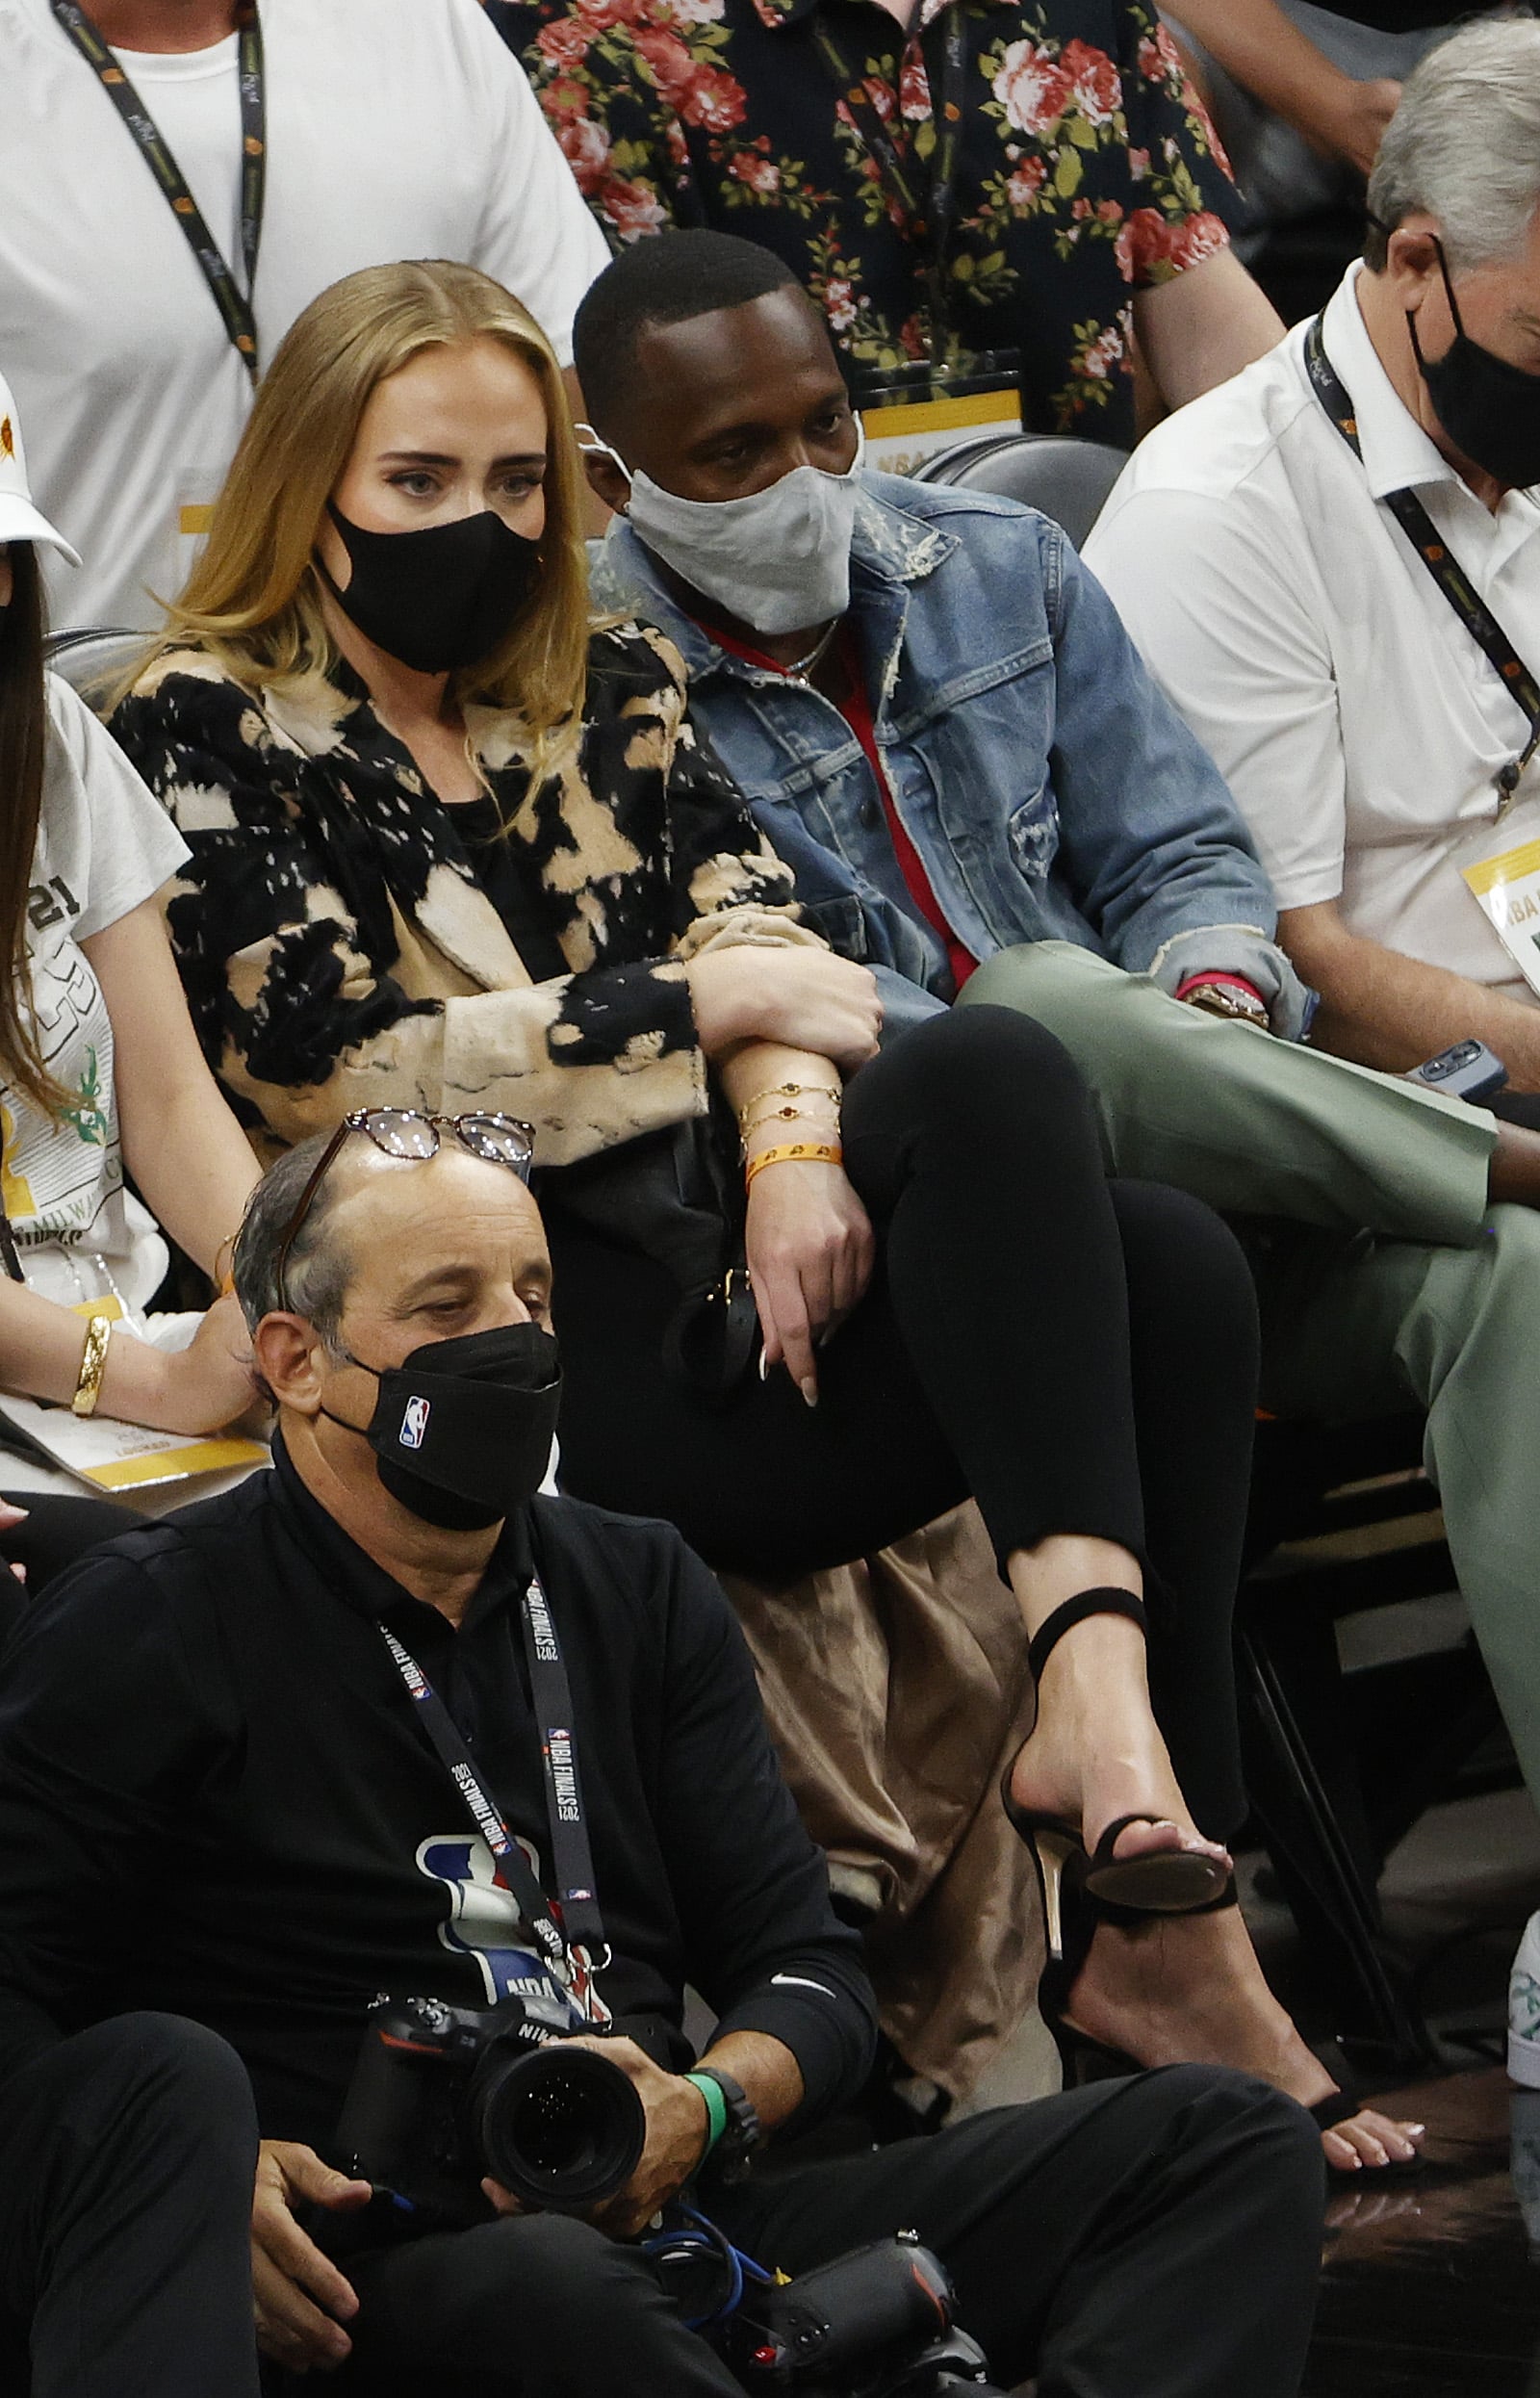 PHOENIX, ARIZONA - JULY 17: Singer Adele looks on next to Rich Paul during the first half in Game Five of the NBA Finals between the Milwaukee Bucks and the Phoenix Suns at Footprint Center on July 17, 2021 in Phoenix, Arizona. NOTE TO USER: User expressly acknowledges and agrees that, by downloading and or using this photograph, User is consenting to the terms and conditions of the Getty Images License Agreement.  (Photo by Christian Petersen/Getty Images)